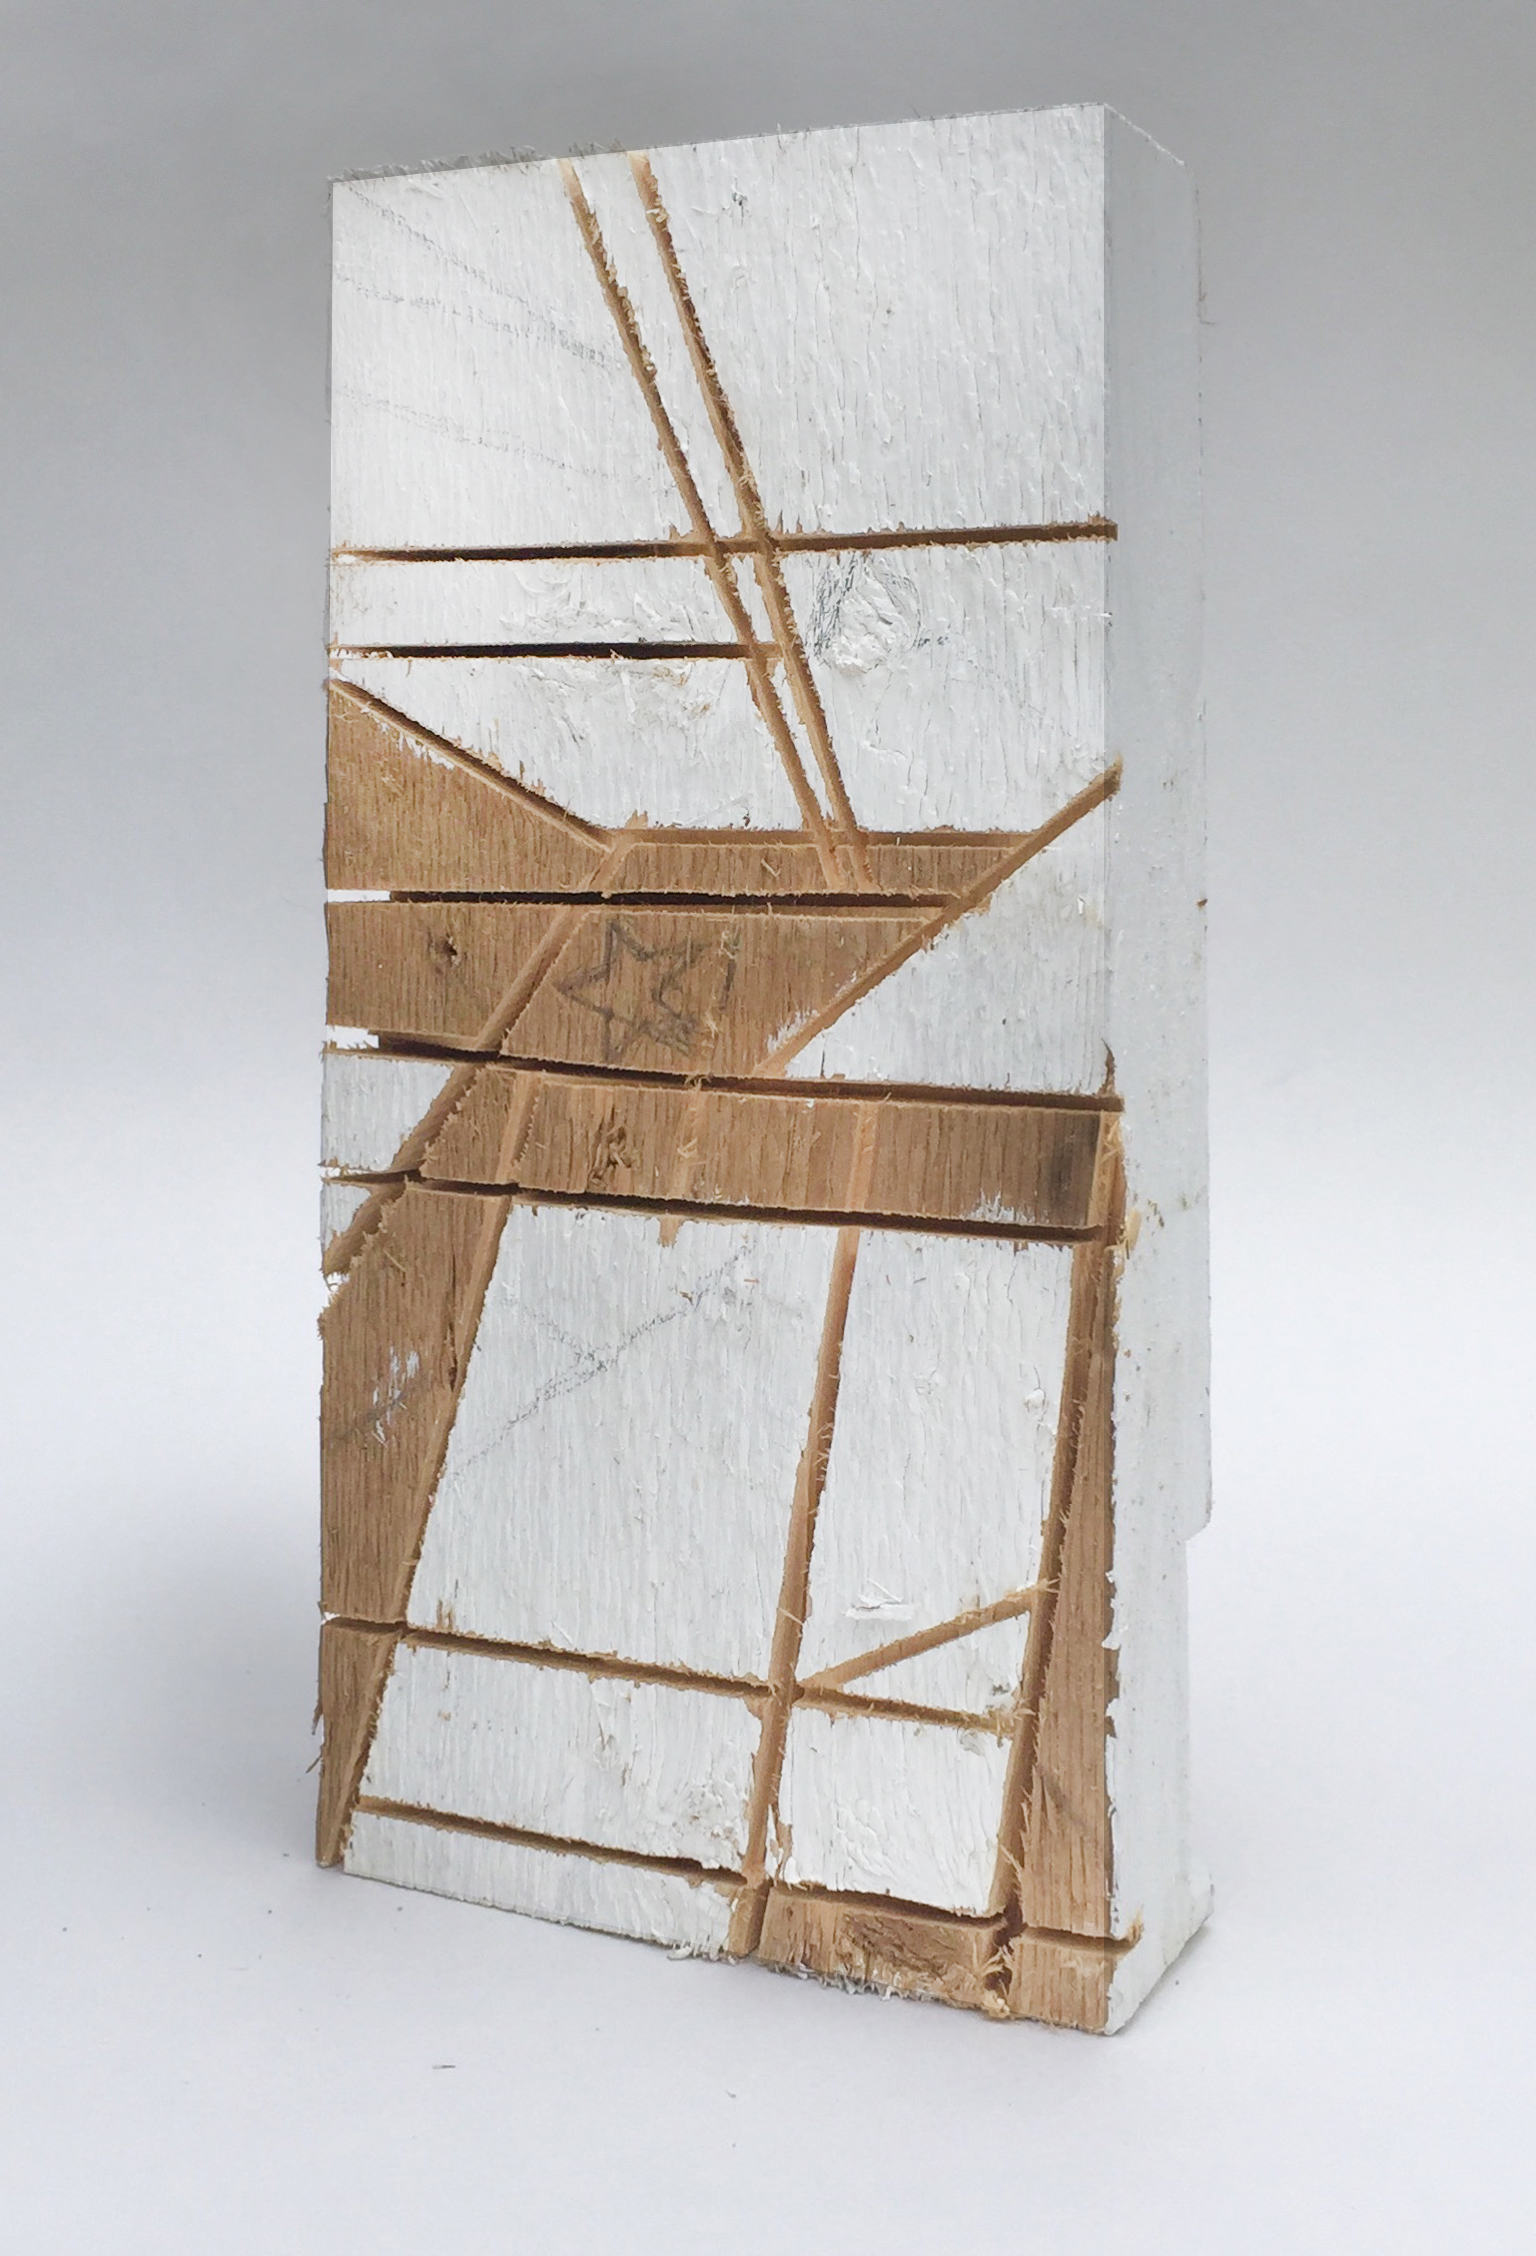 Intersection in White,  2017, house paint on reclaimed lumber, 13 x 6.5 x 2 in, $1100